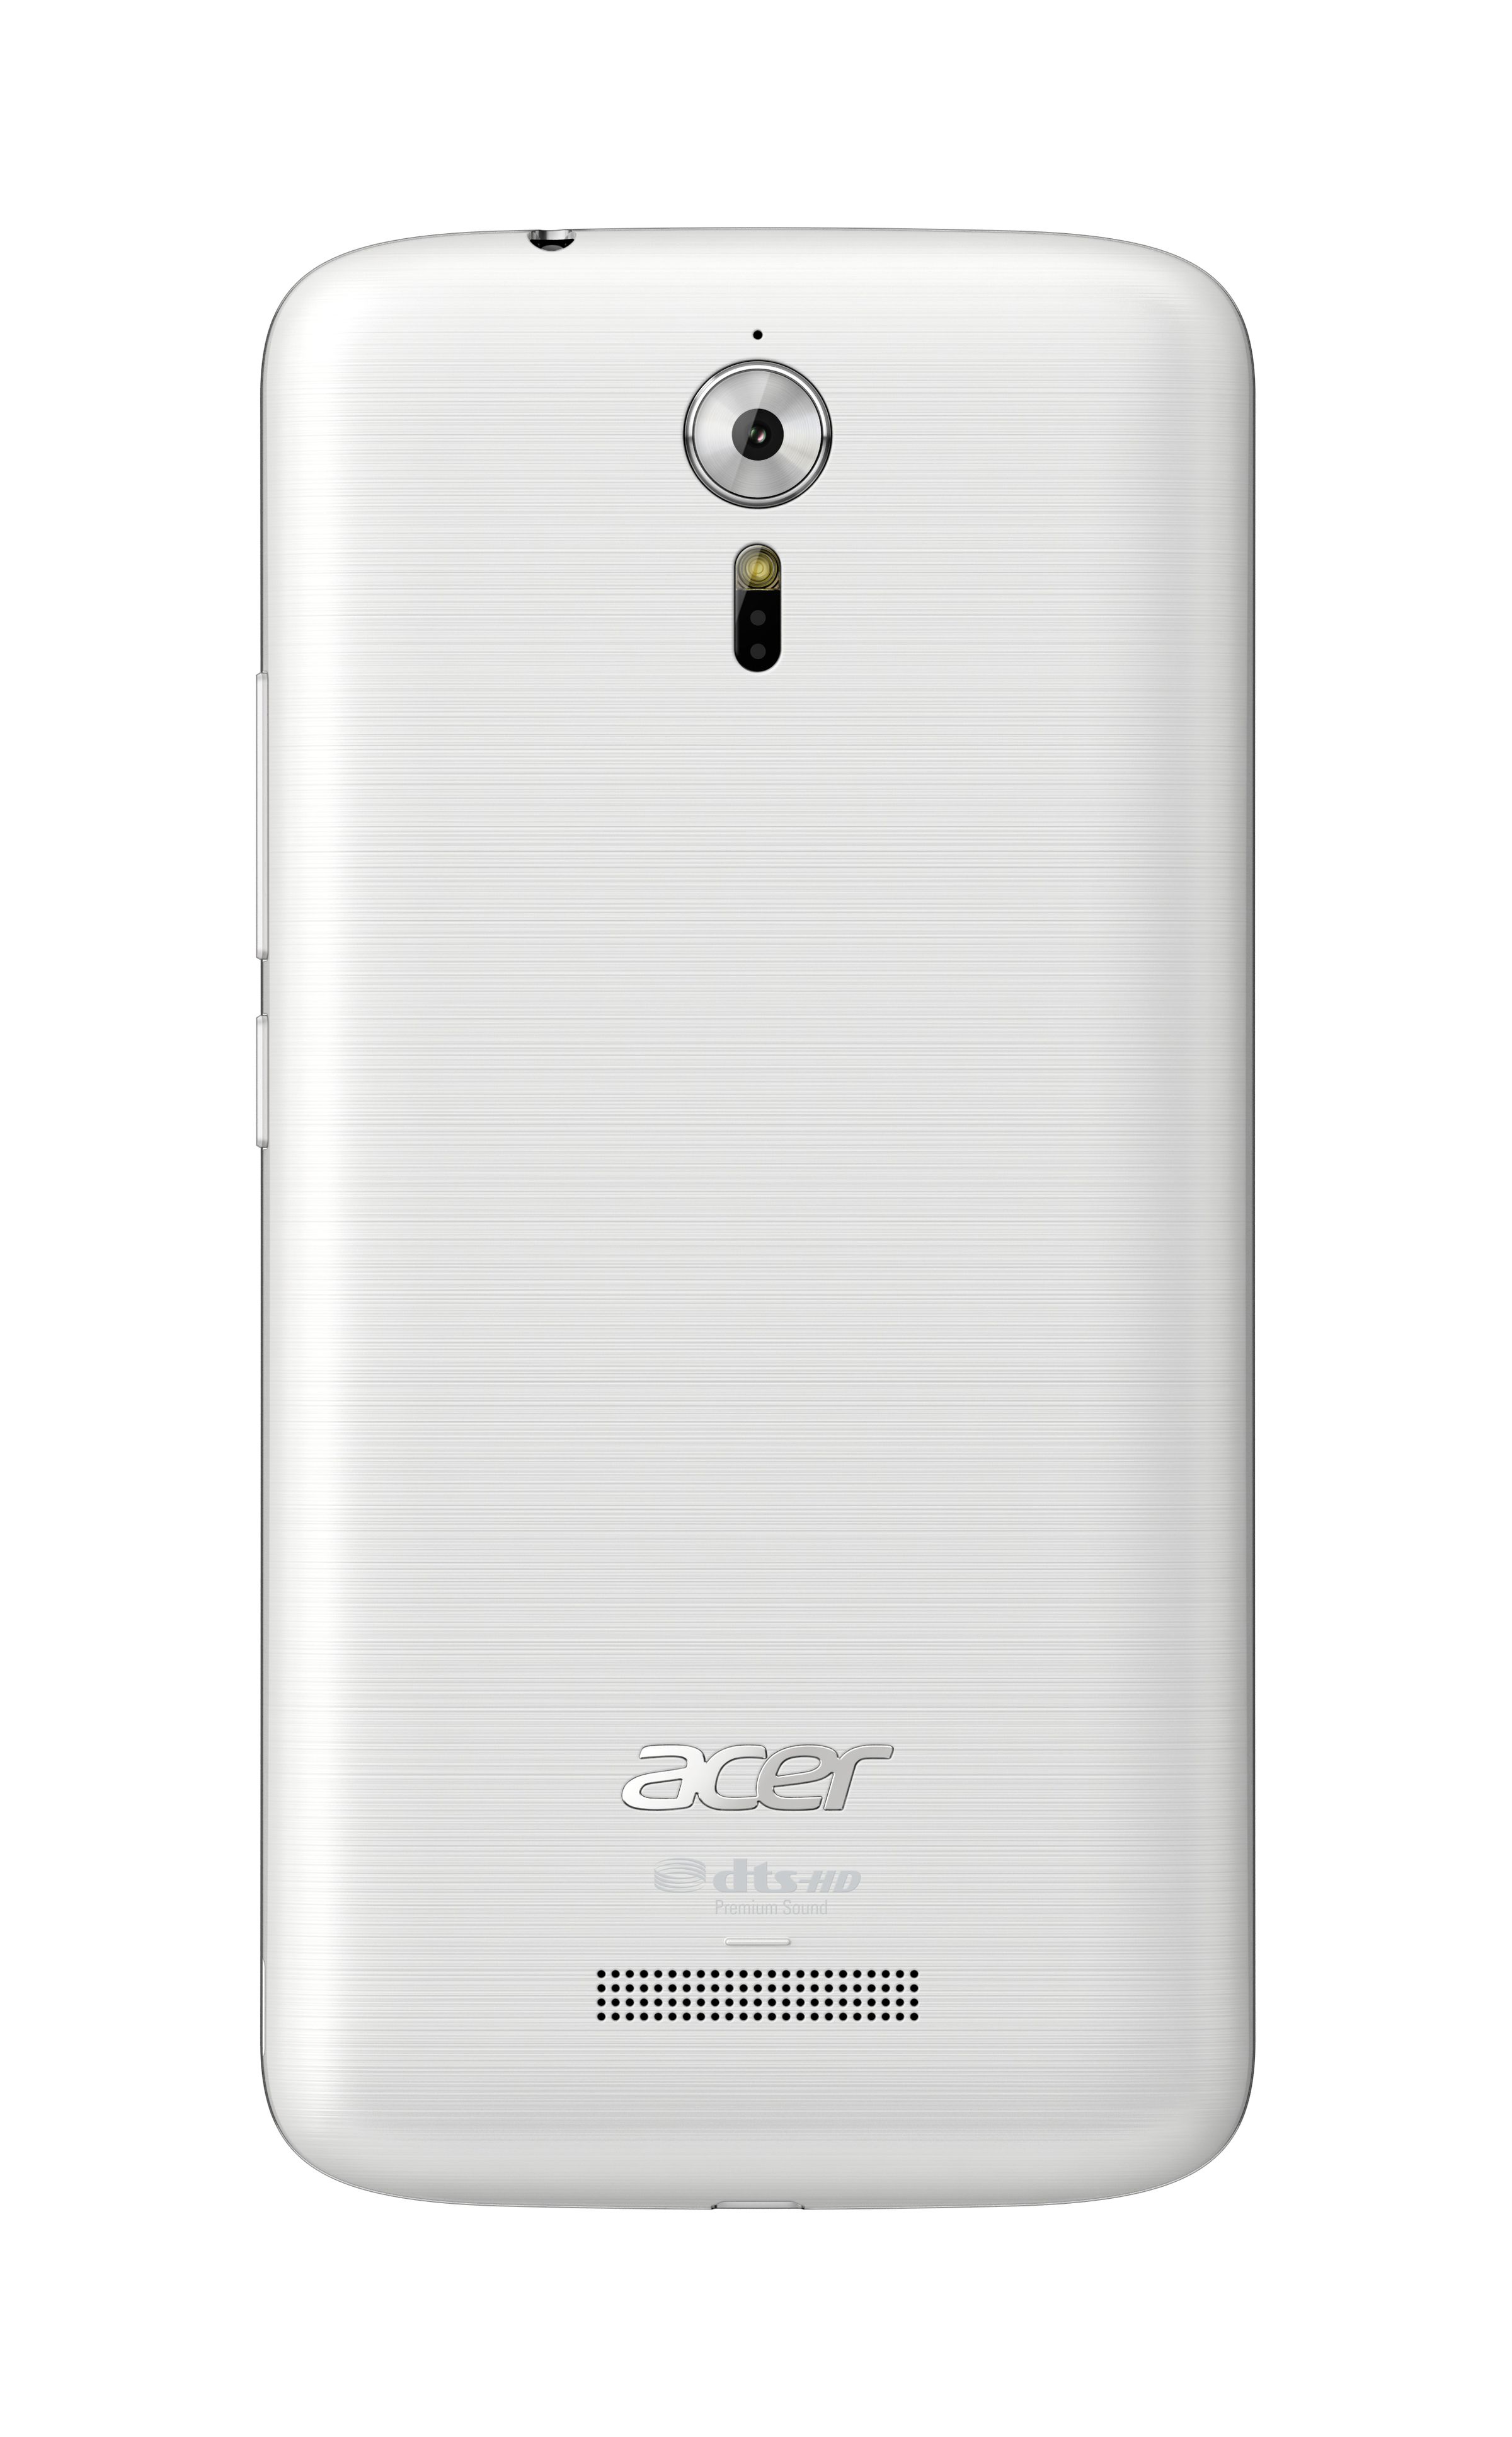 Acer's Liquid Zest Plus has a North American release date